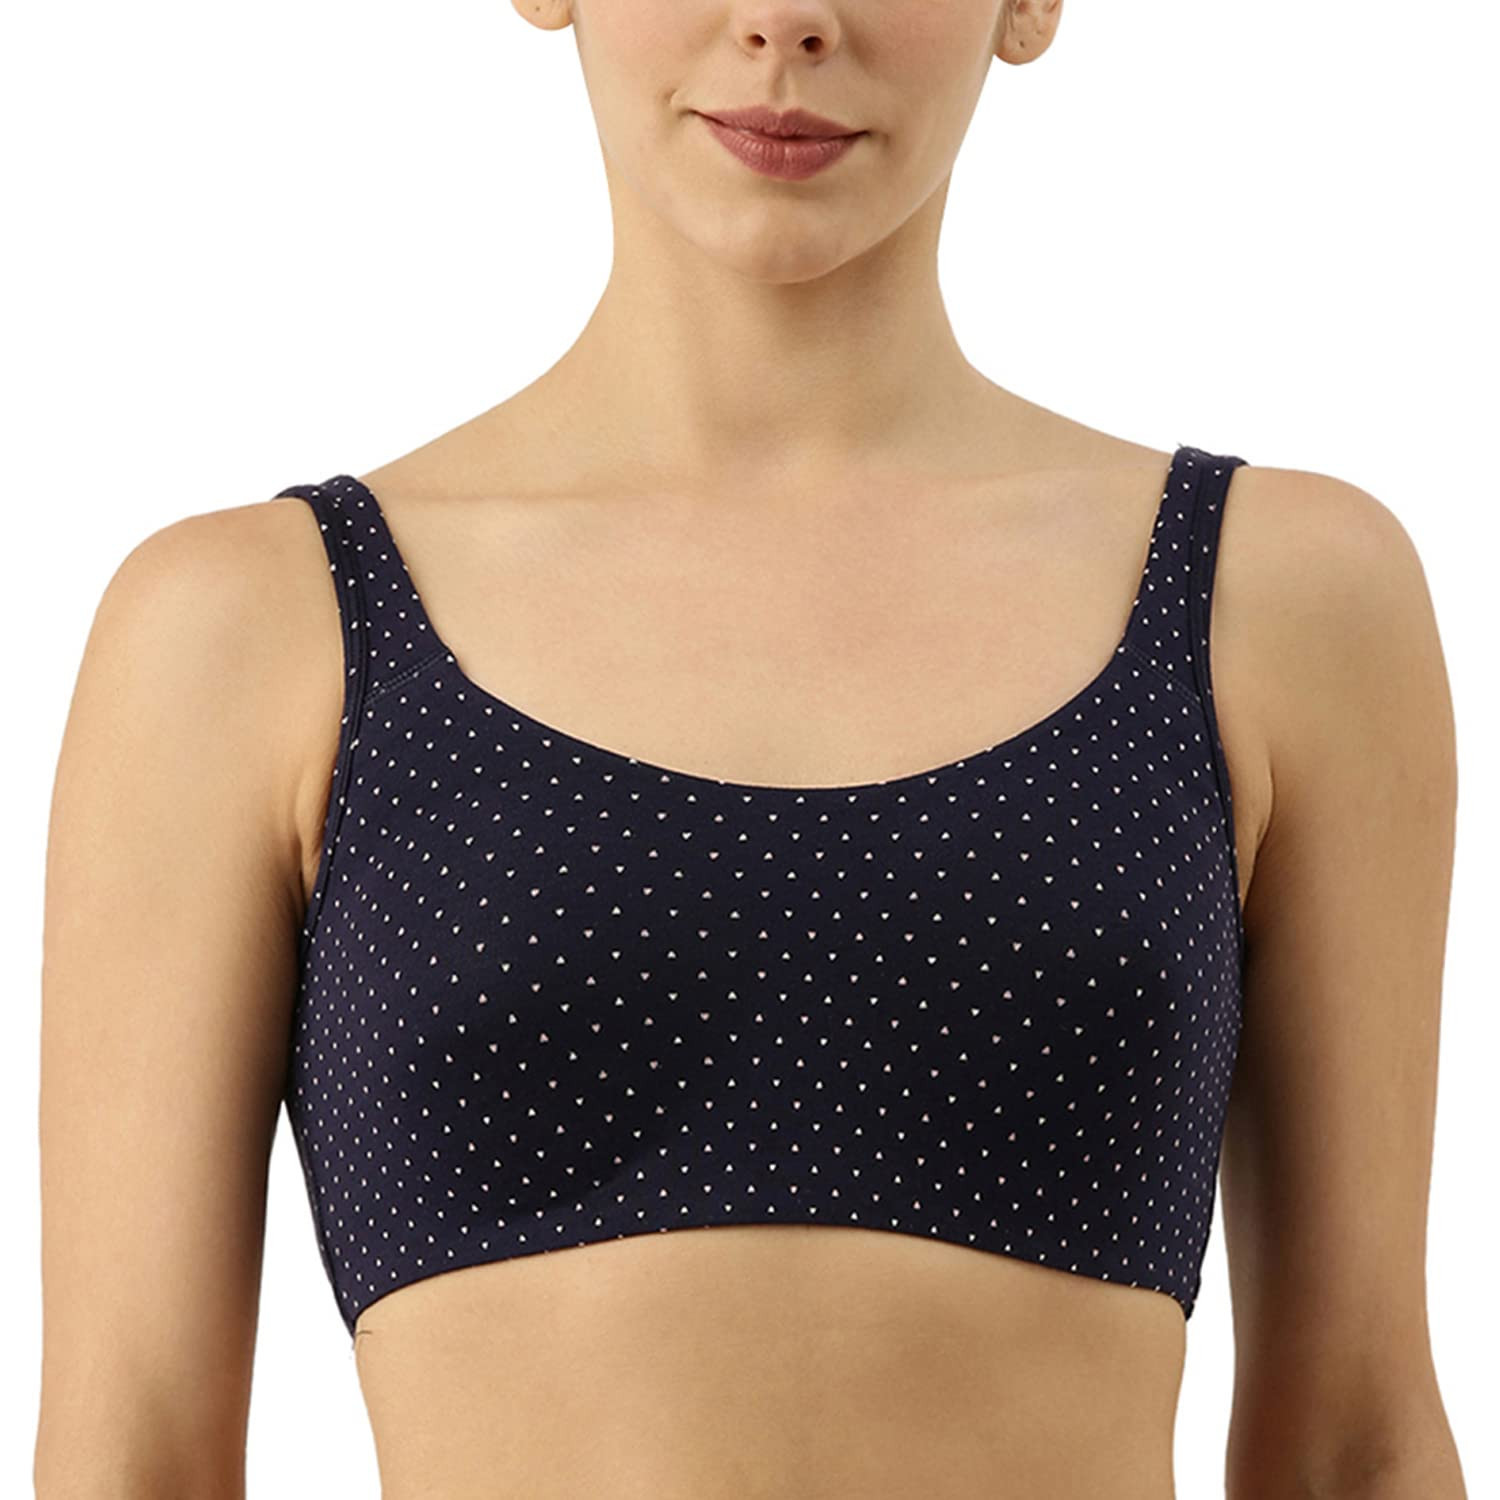 https://www.zebrs.com/uploads/zebrs/products/enamor-sb06-cotton-low-impact-slip-on-everyday-sports-bra-for-women---non-padded-non-wired-amp-high-coverage--available-in-solids-amp-printssb06-ditsy-heart-print-l-21828308265338_l.jpg